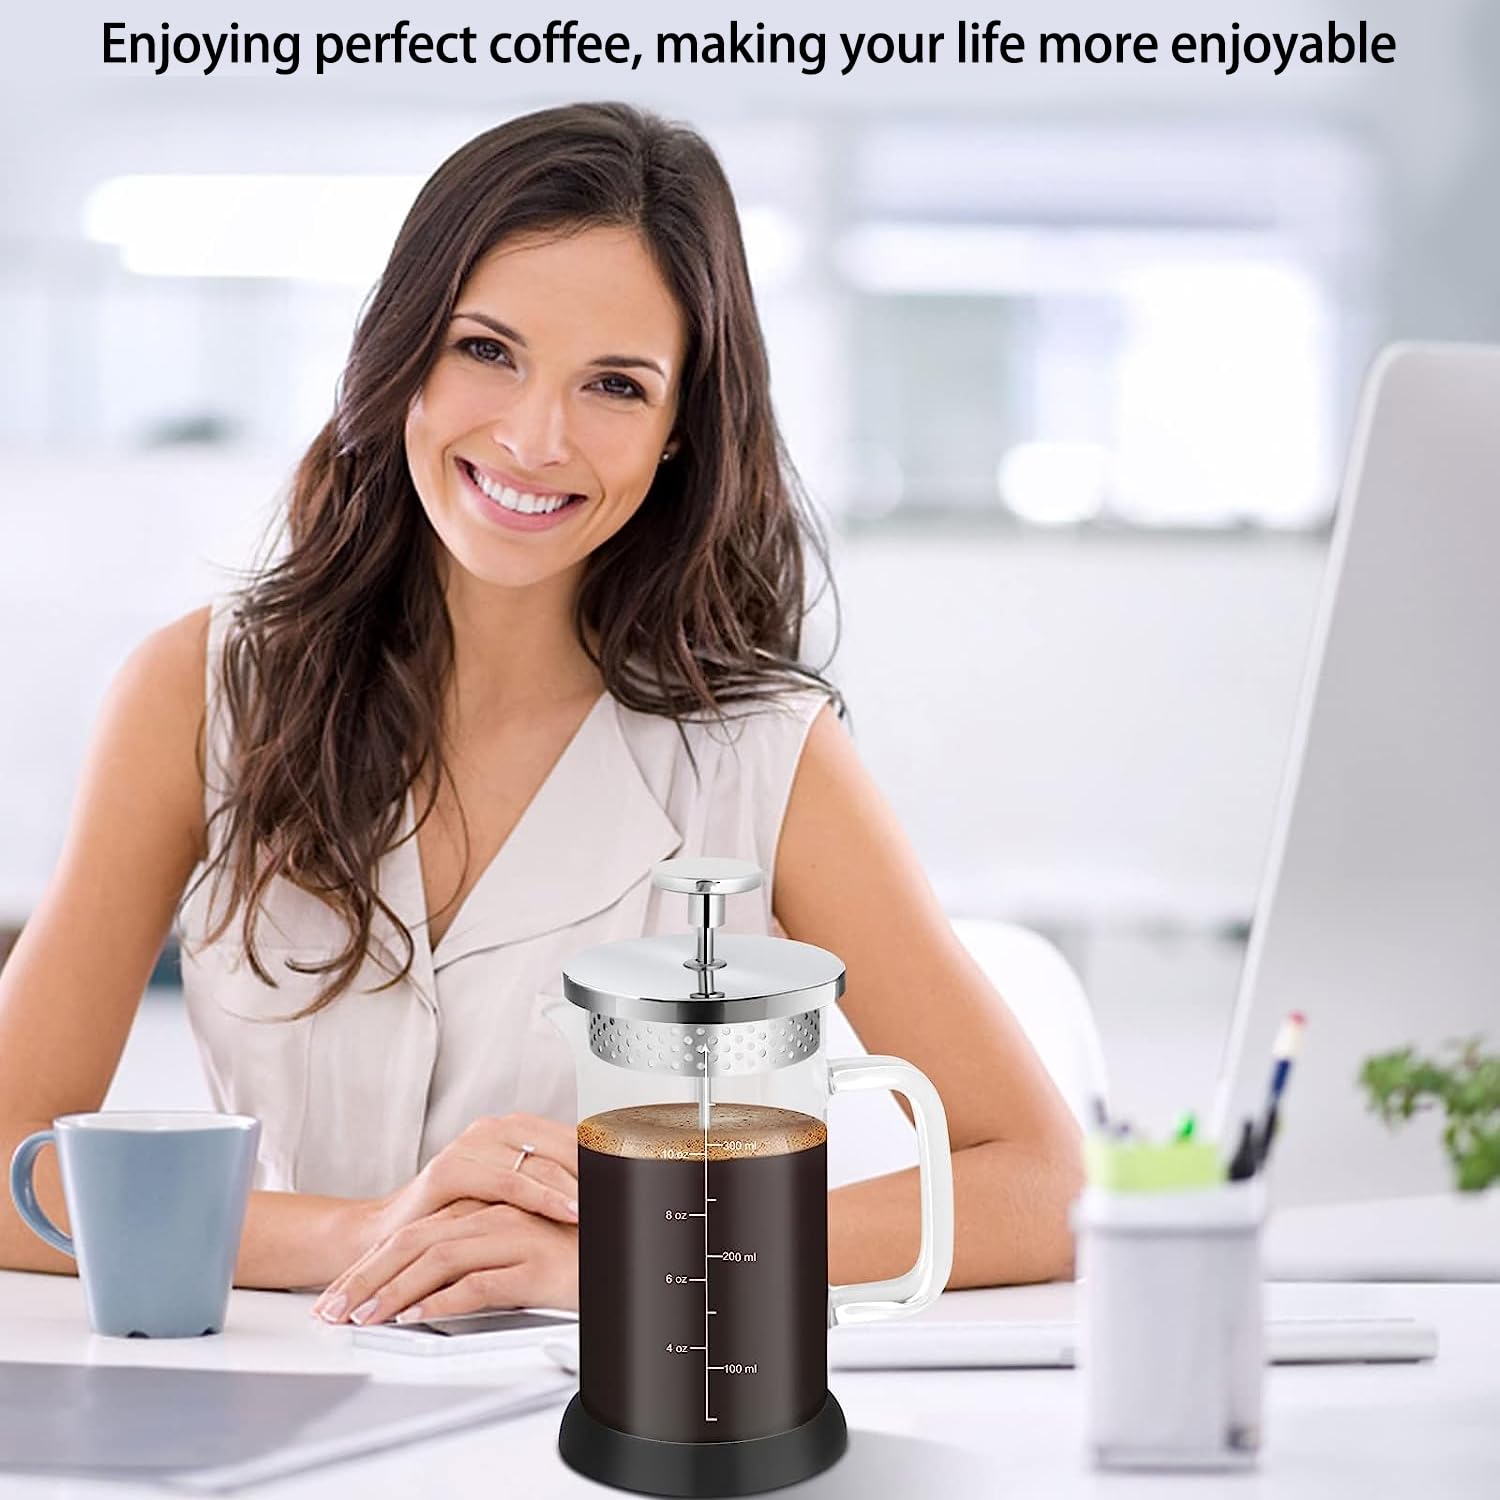 Nukeekee French Press Coffee Maker,304 Stainless Steel Borosilicate Glass Coffee Press,Non-slip Silicone Base,12 oz /350 ml Small French Press,with 2 Extra Screens,Clear and Silver (Concise Style).